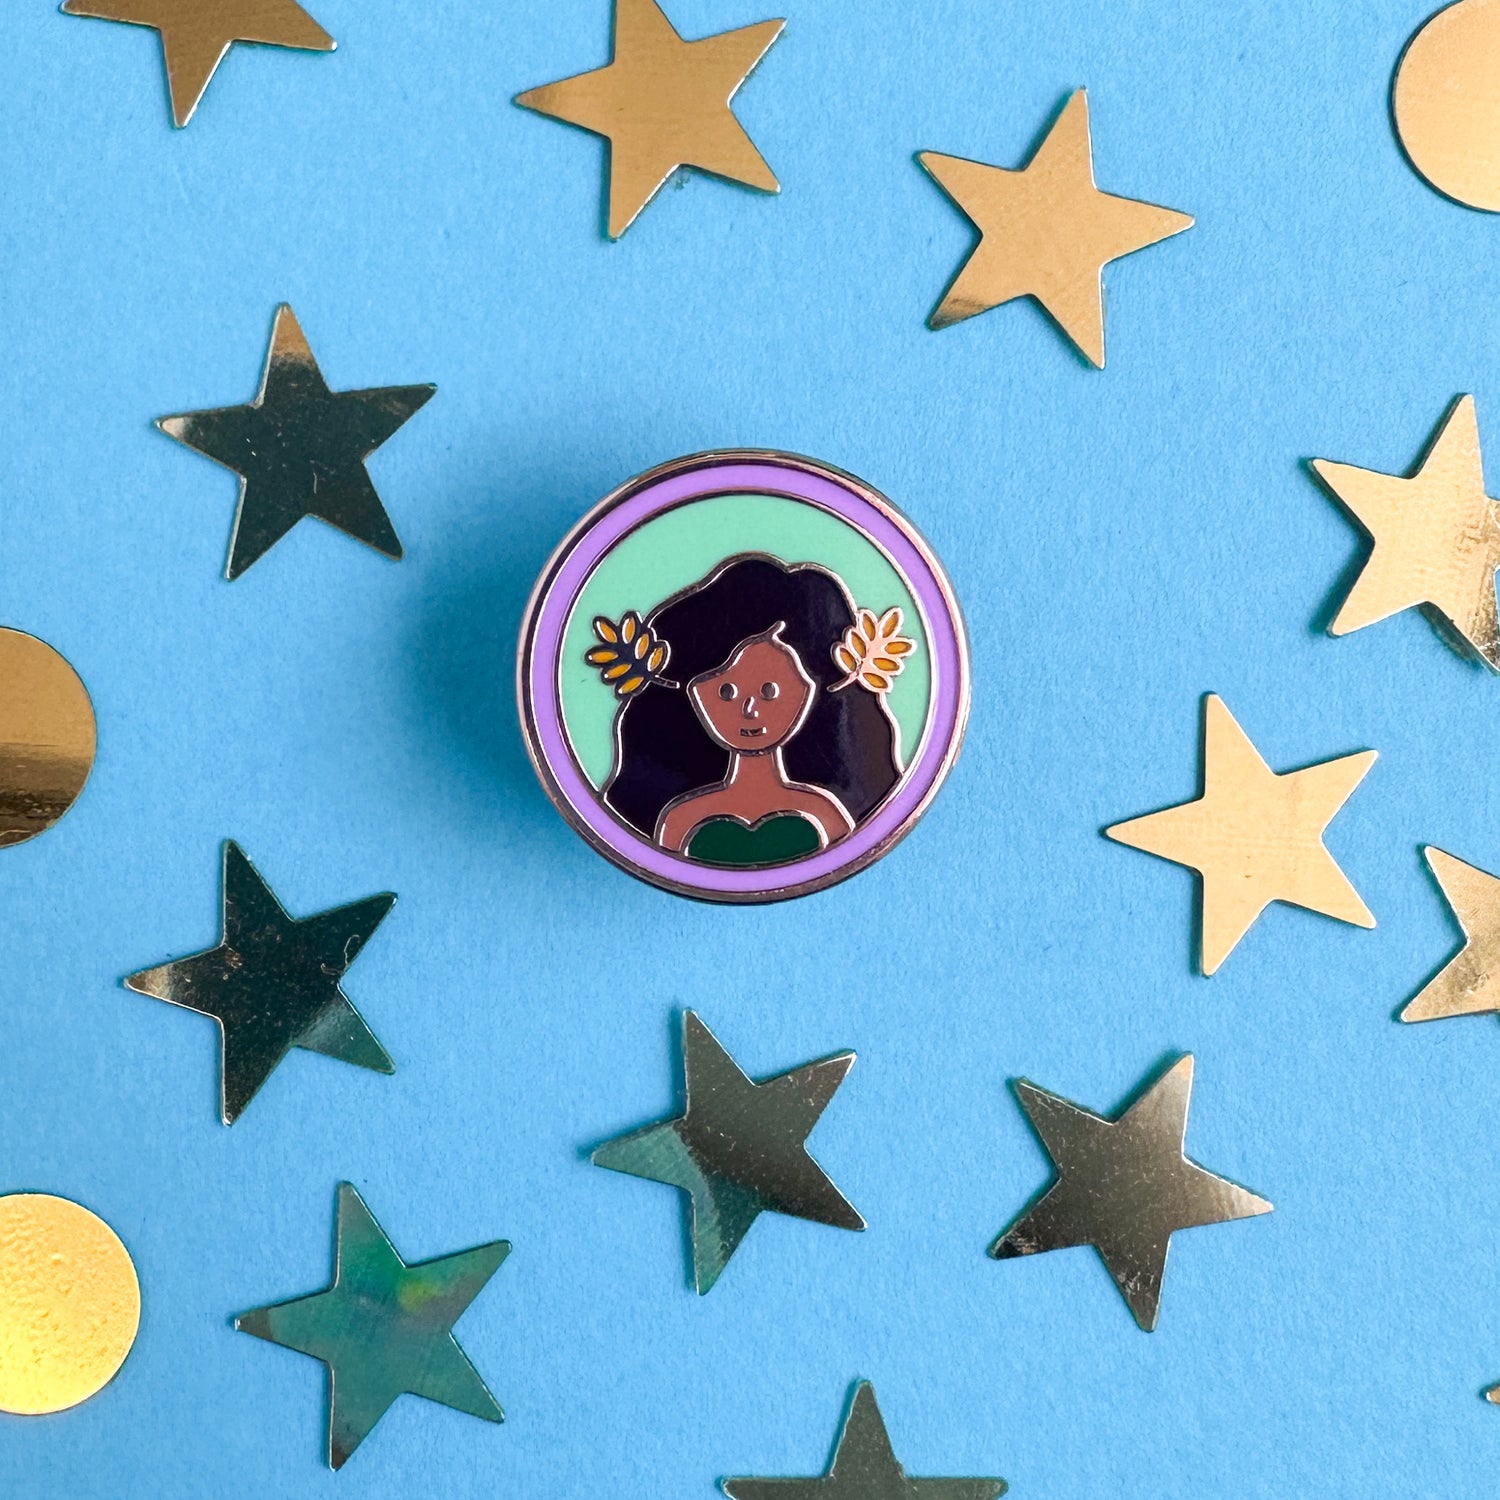 A circle enamel pin with an illustration of a woman with brown skin and flowing brown hair with wheat fronds in it to represent the Virgo zodiac sign symbol. The pin is on a blue background with gold star and circle confetti surrounding it. 